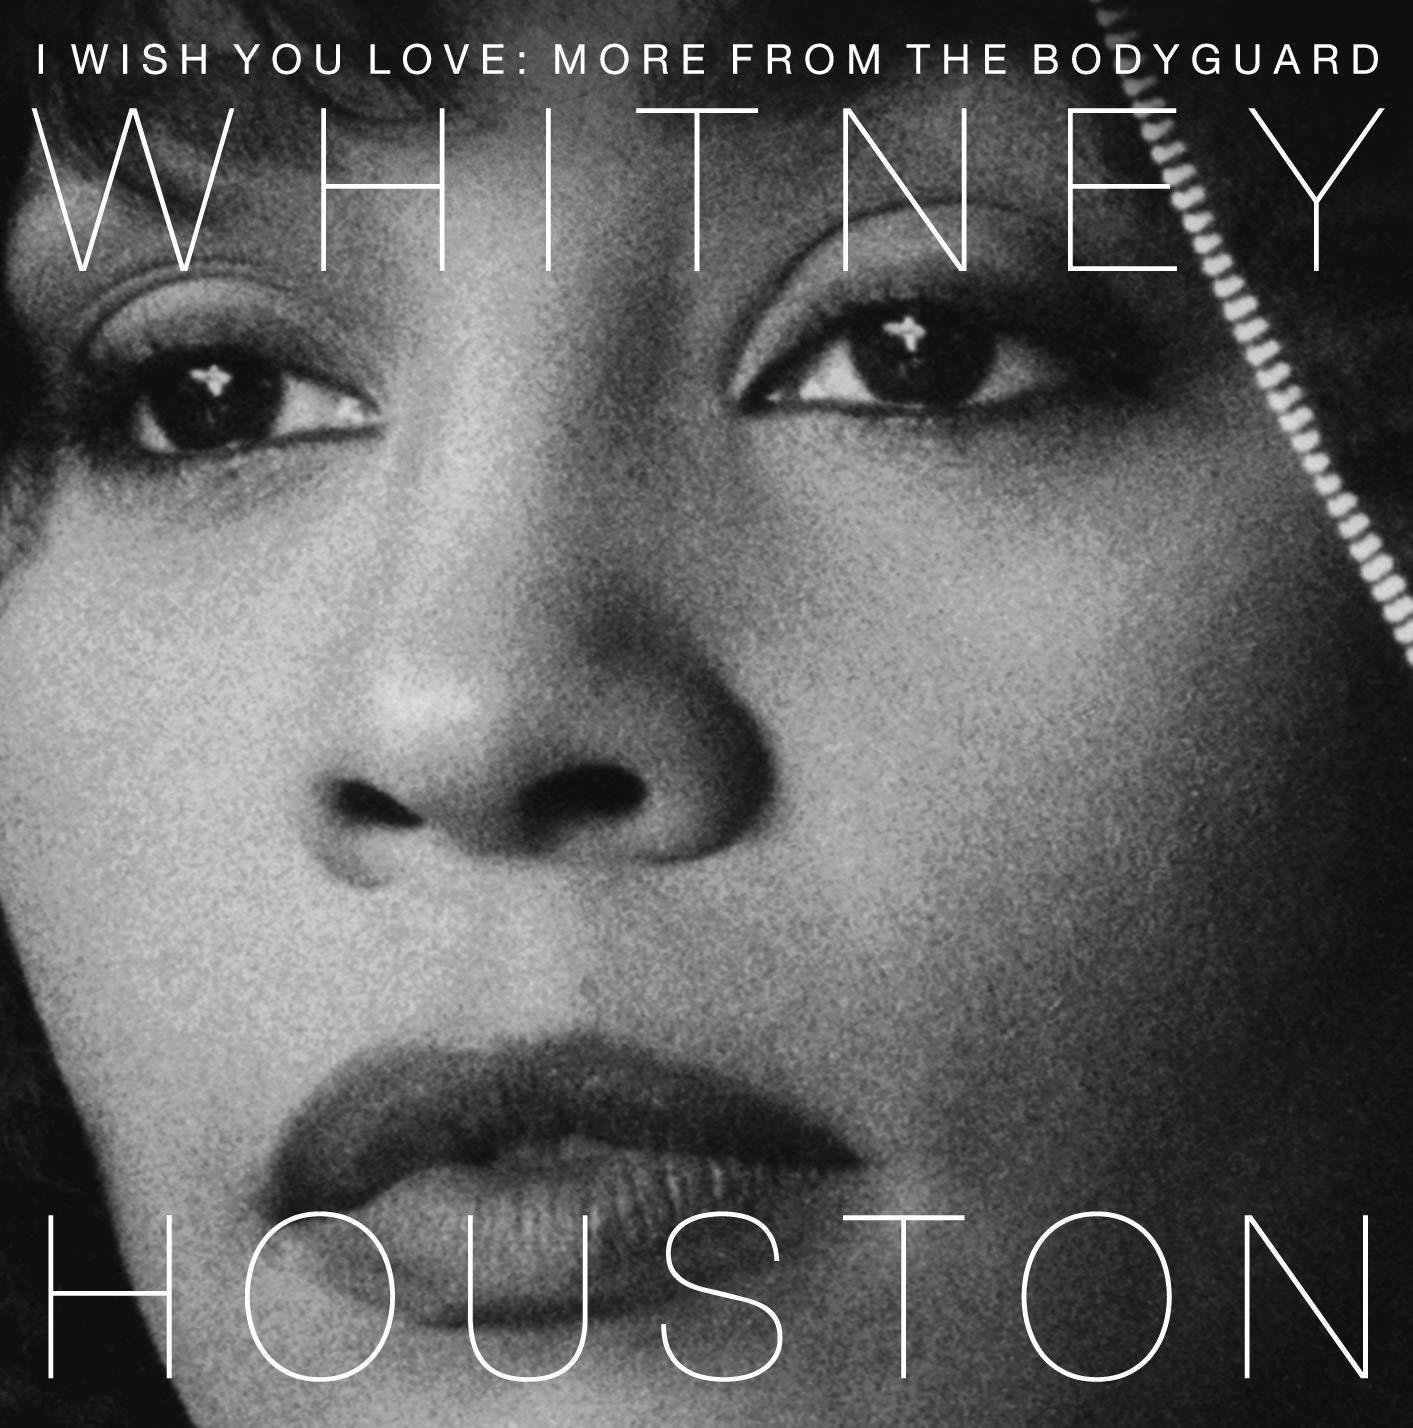 LP plošča Whitney Houston - I Wish You Love: More From the Bodyguard (Anniversary Edition) (Purple Coloured) (2 LP)